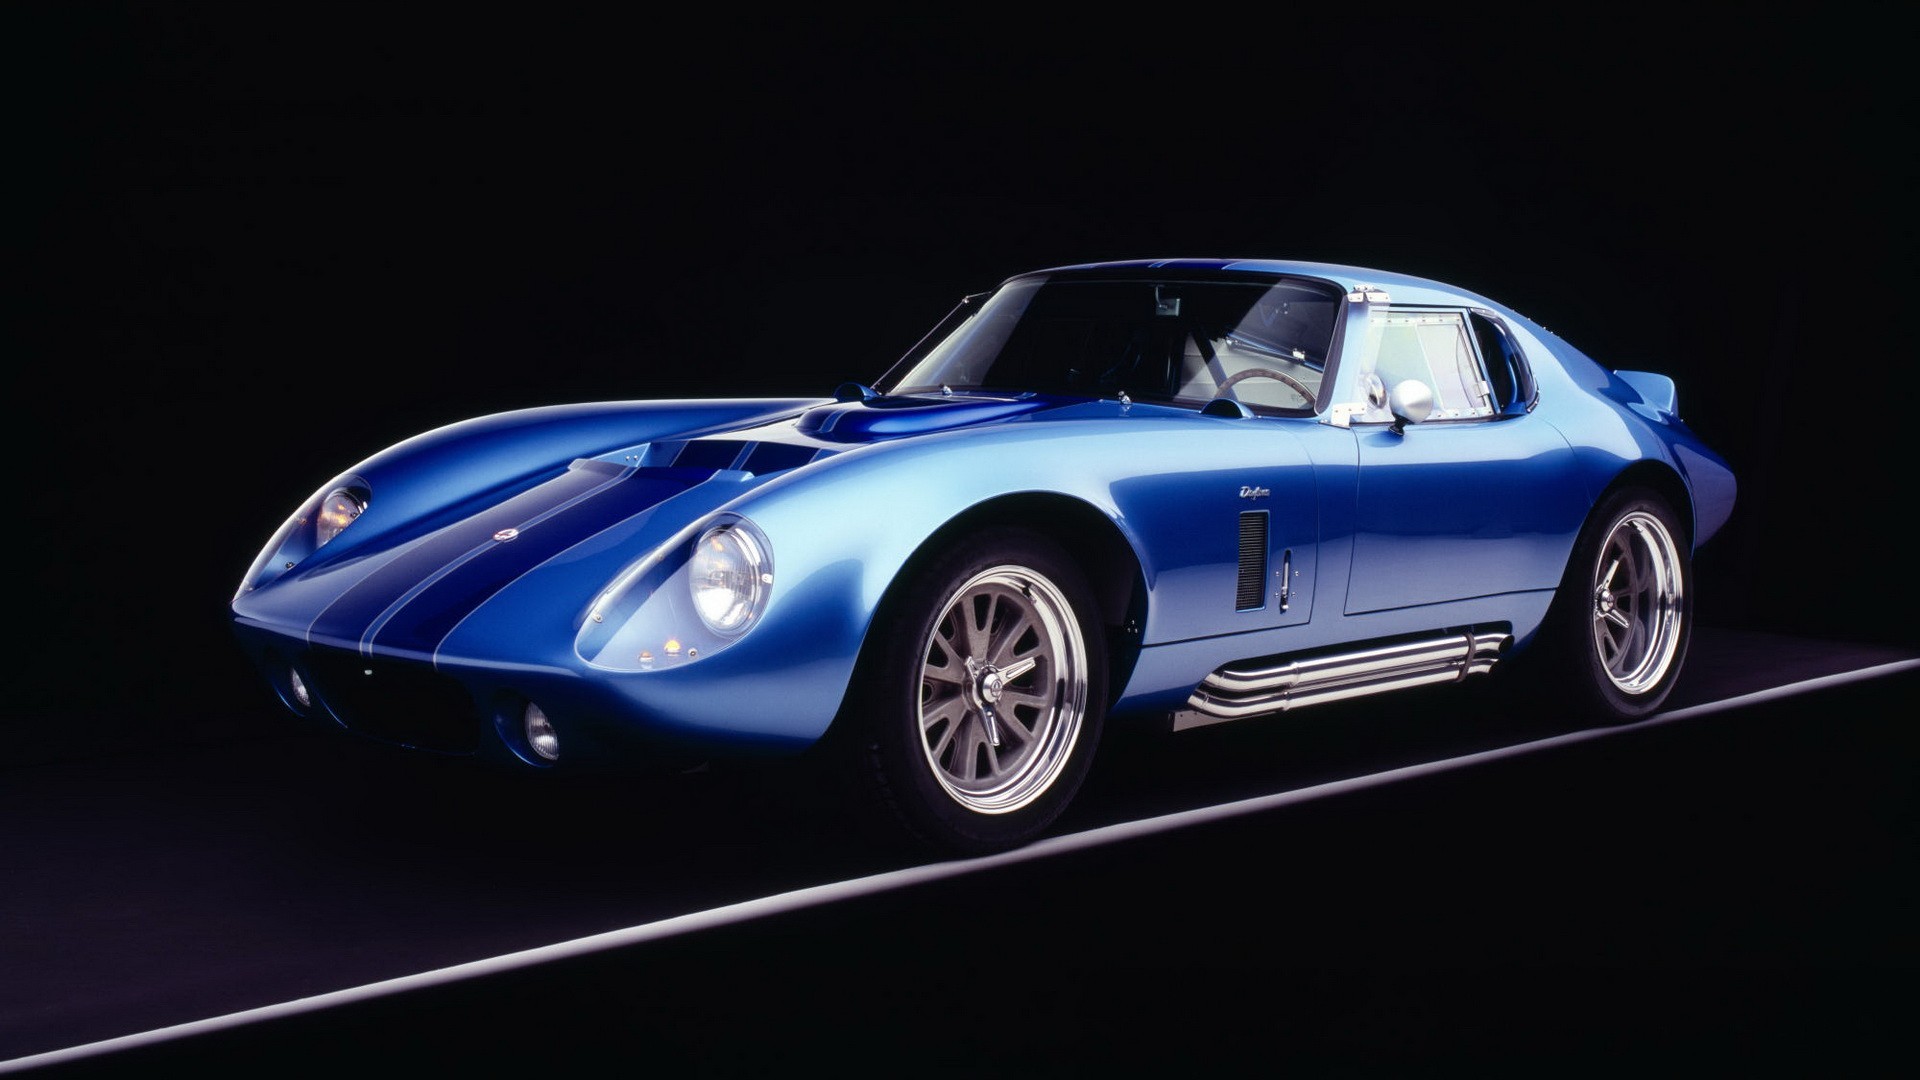 General 1920x1080 car Shelby blue cars Ford vehicle simple background black background Shelby Daytona